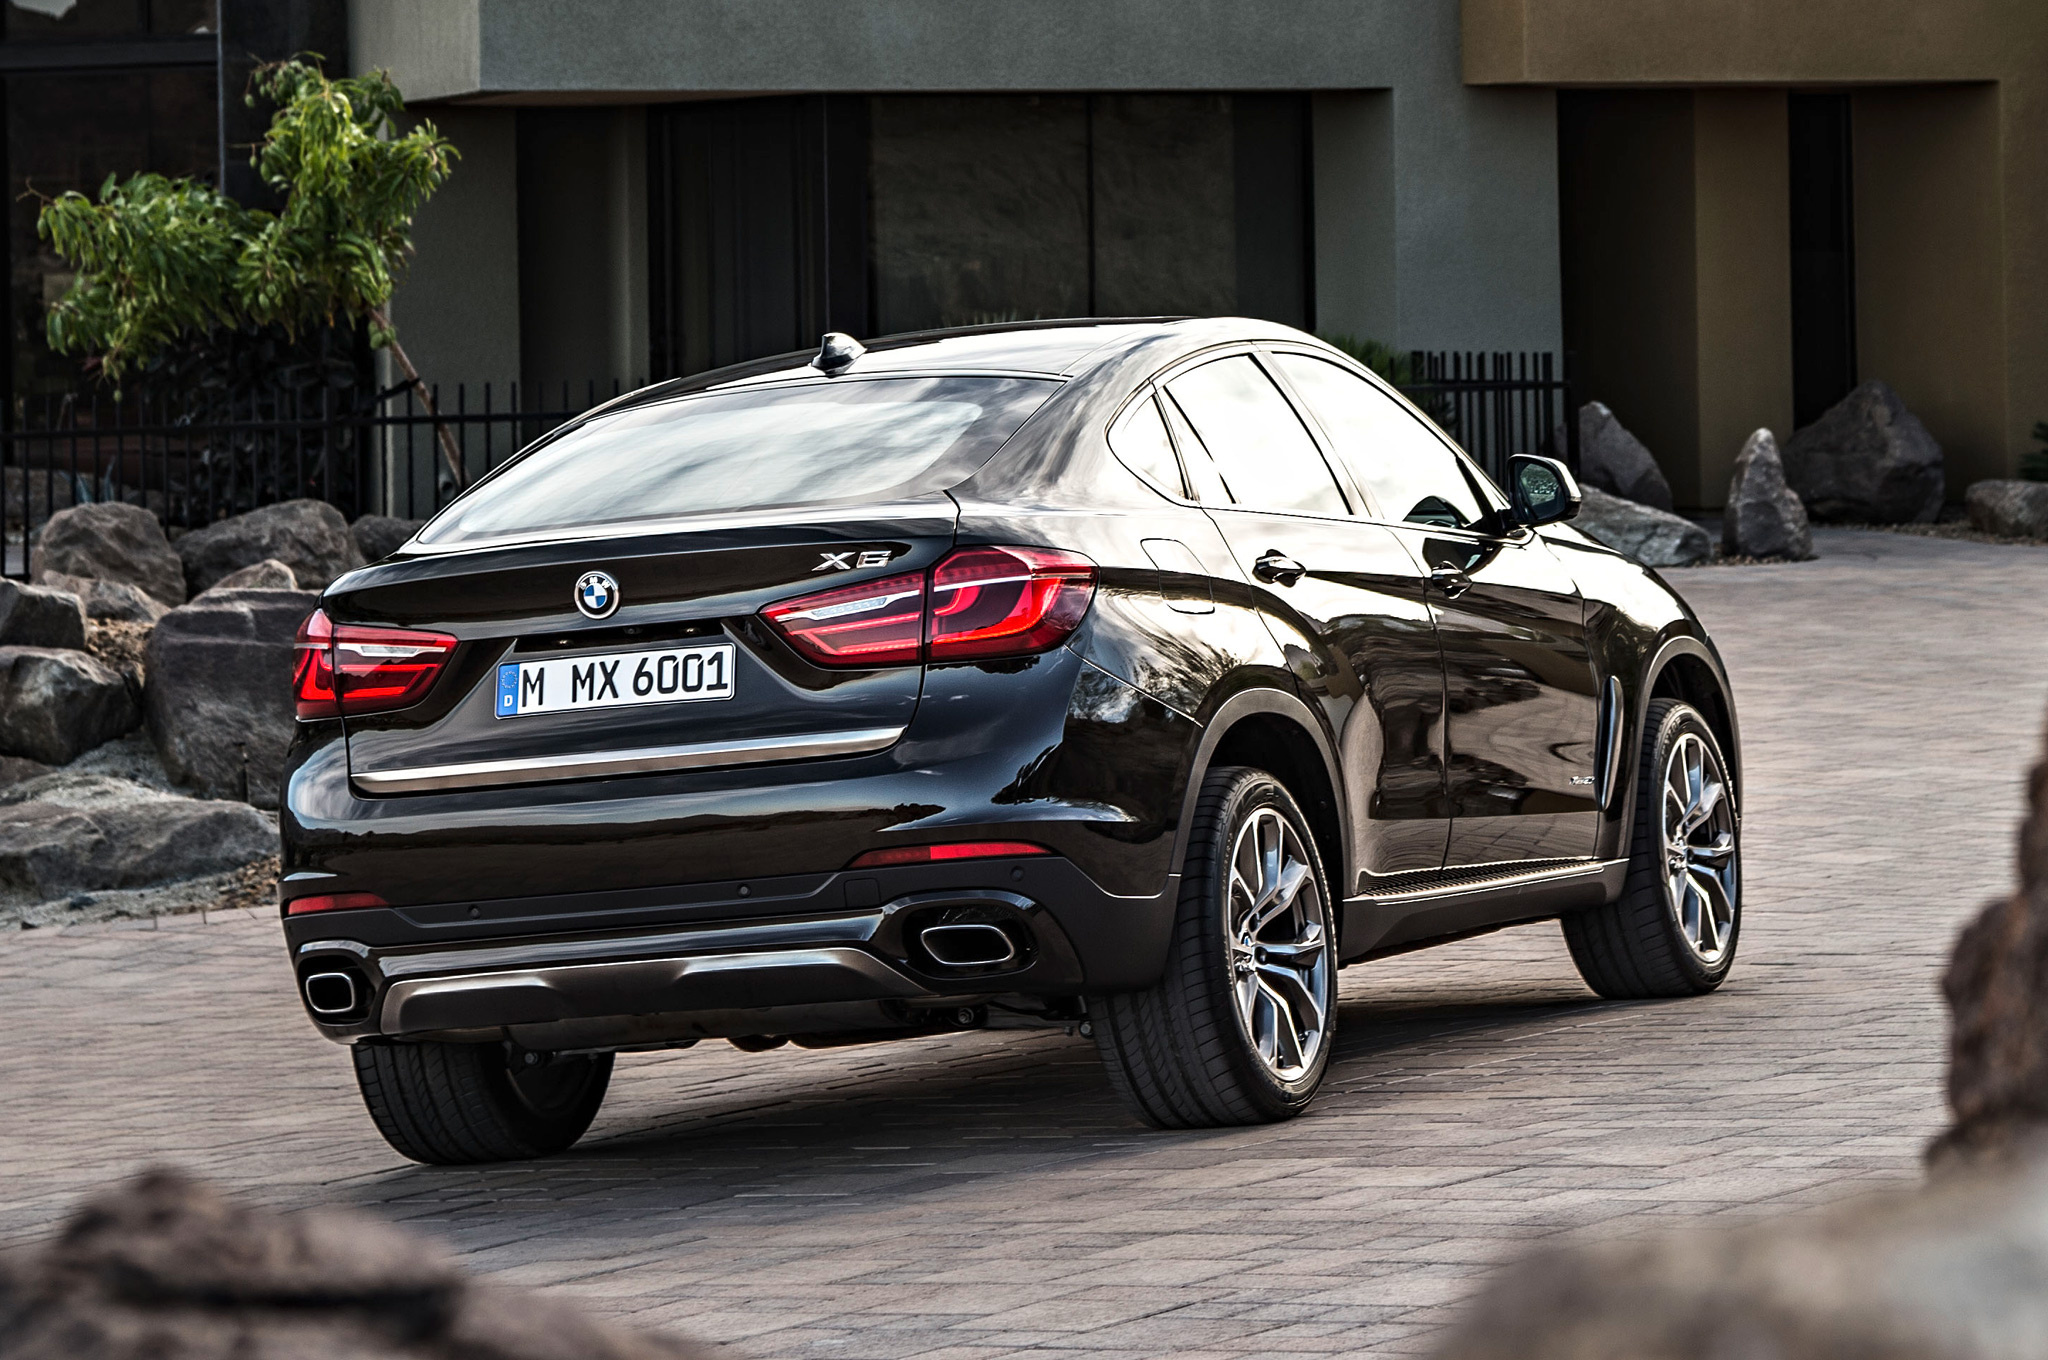 BMW X6, HD wallpapers, 982786 edition, Unmatched luxury, 2050x1360 HD Desktop